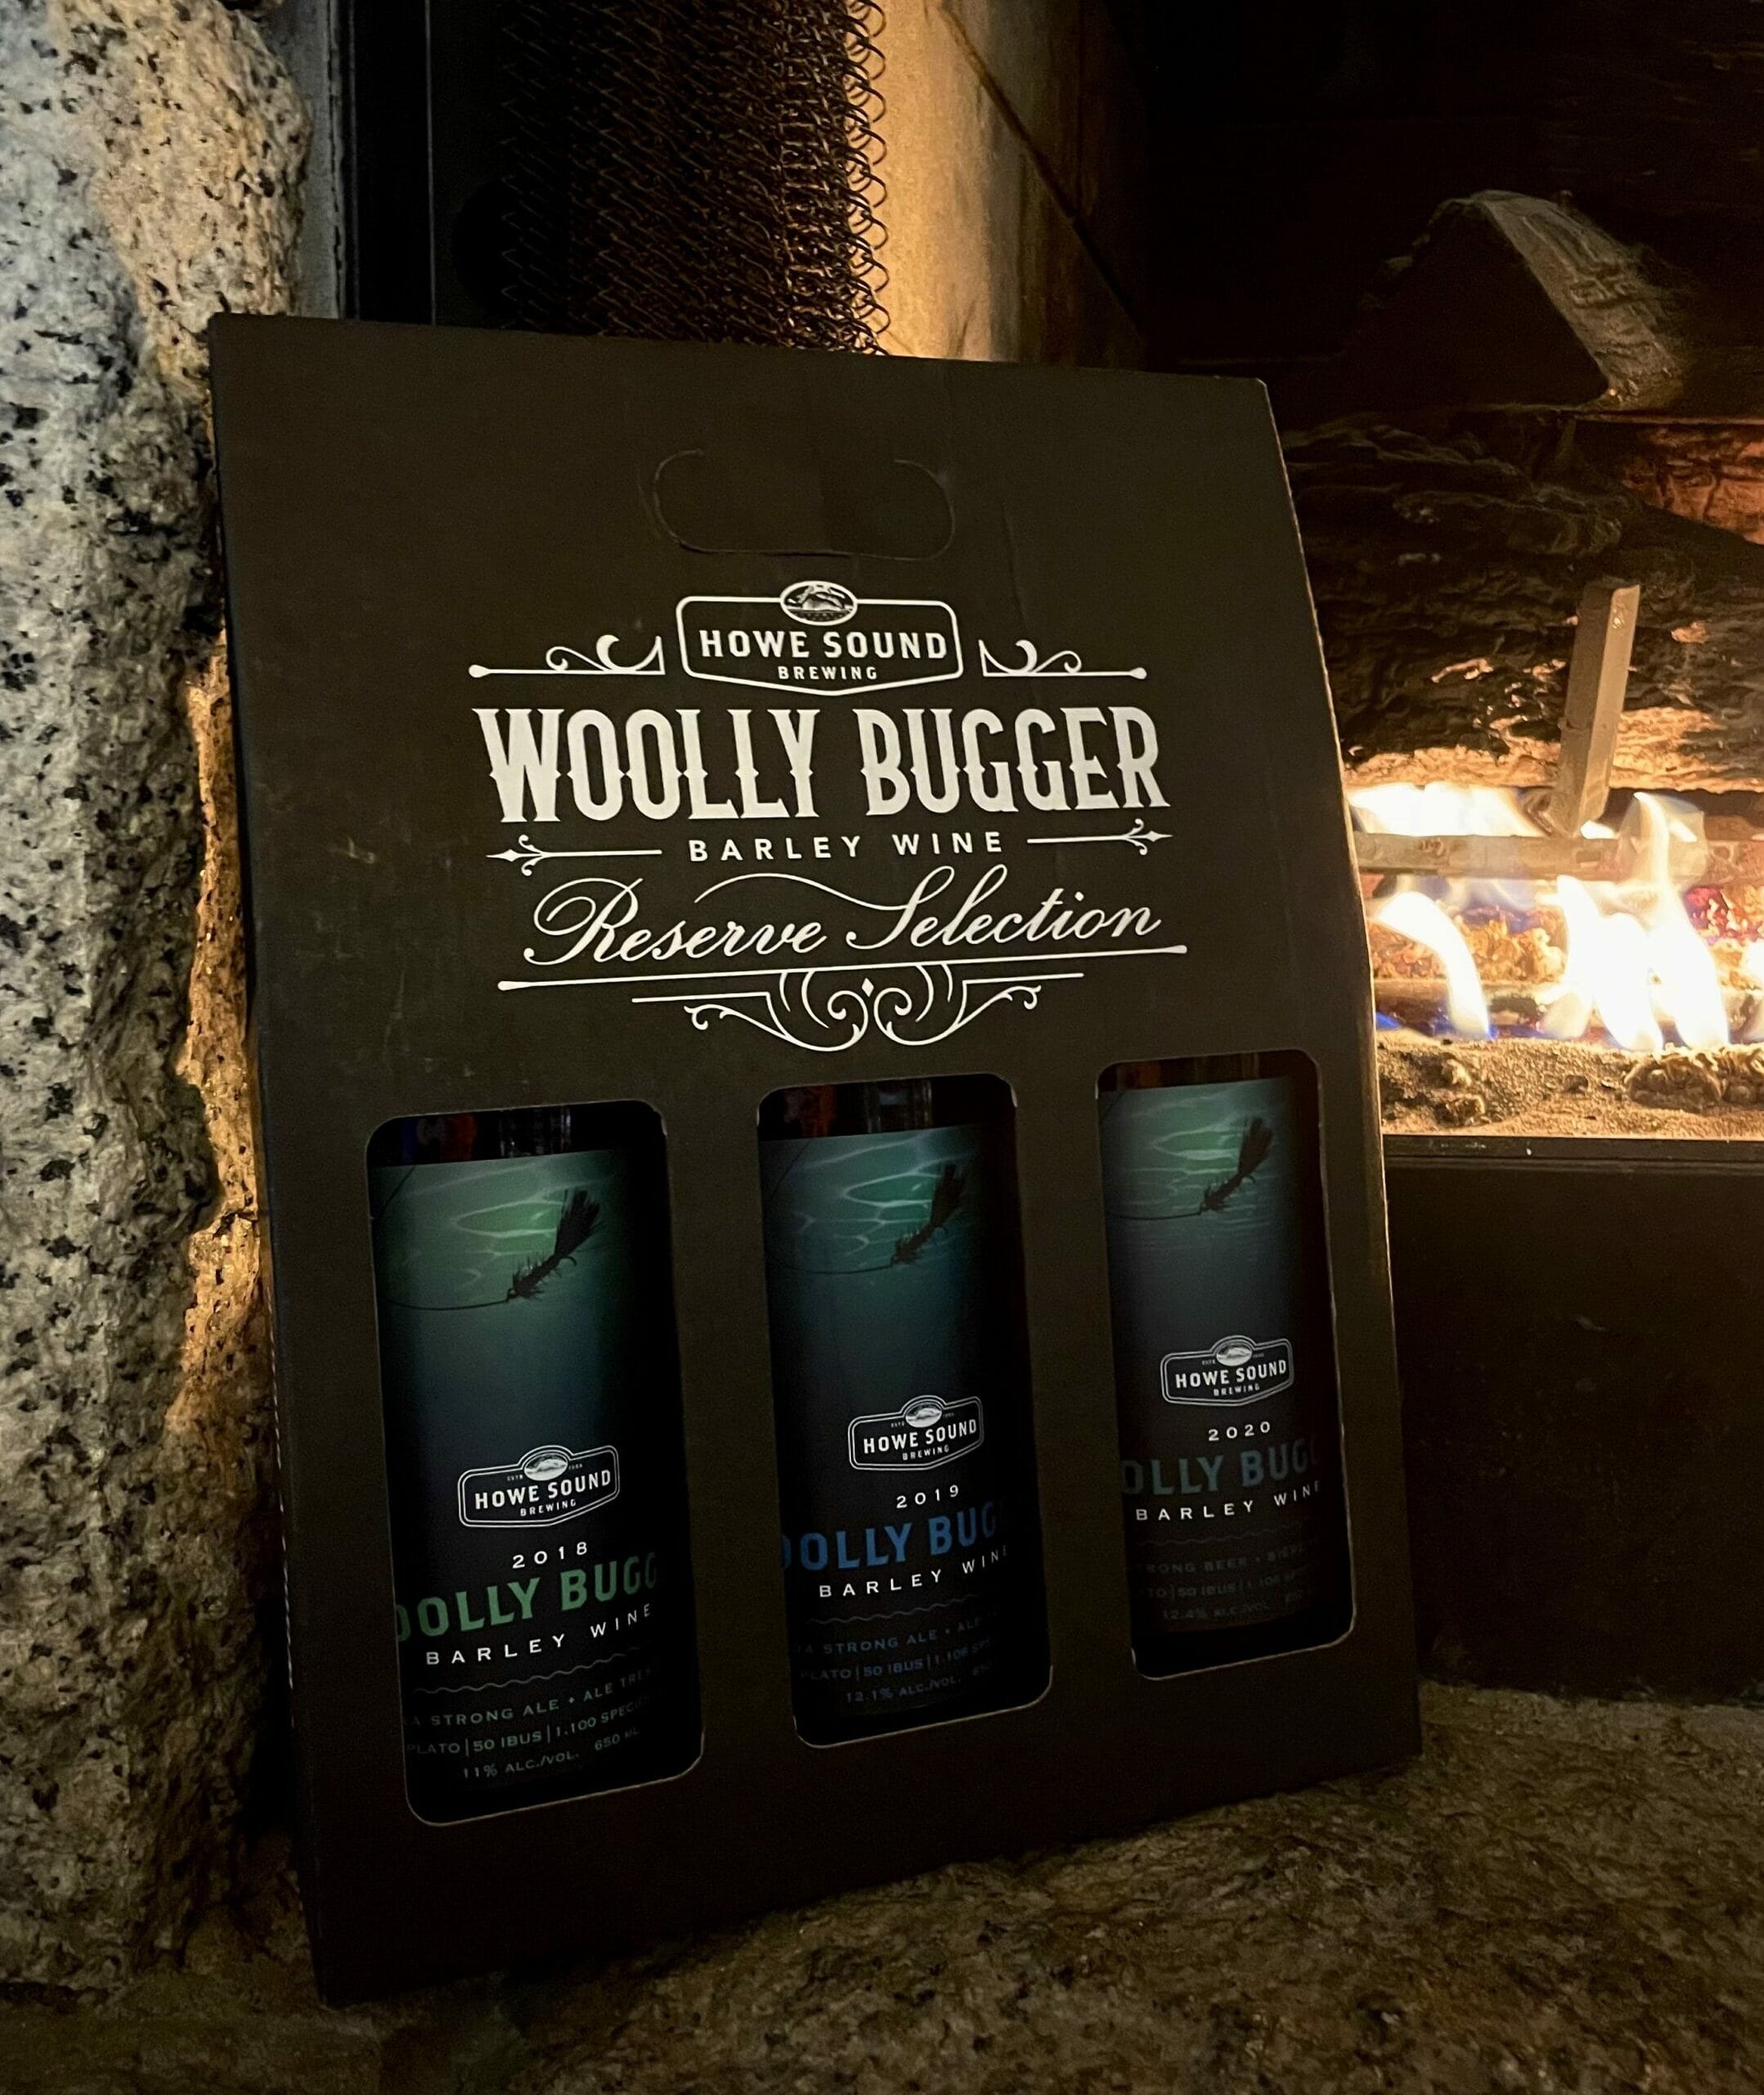 Woolly Bugger Barley Wine 2018-2020 Special Reserve Pack - Howe Sound Brewing